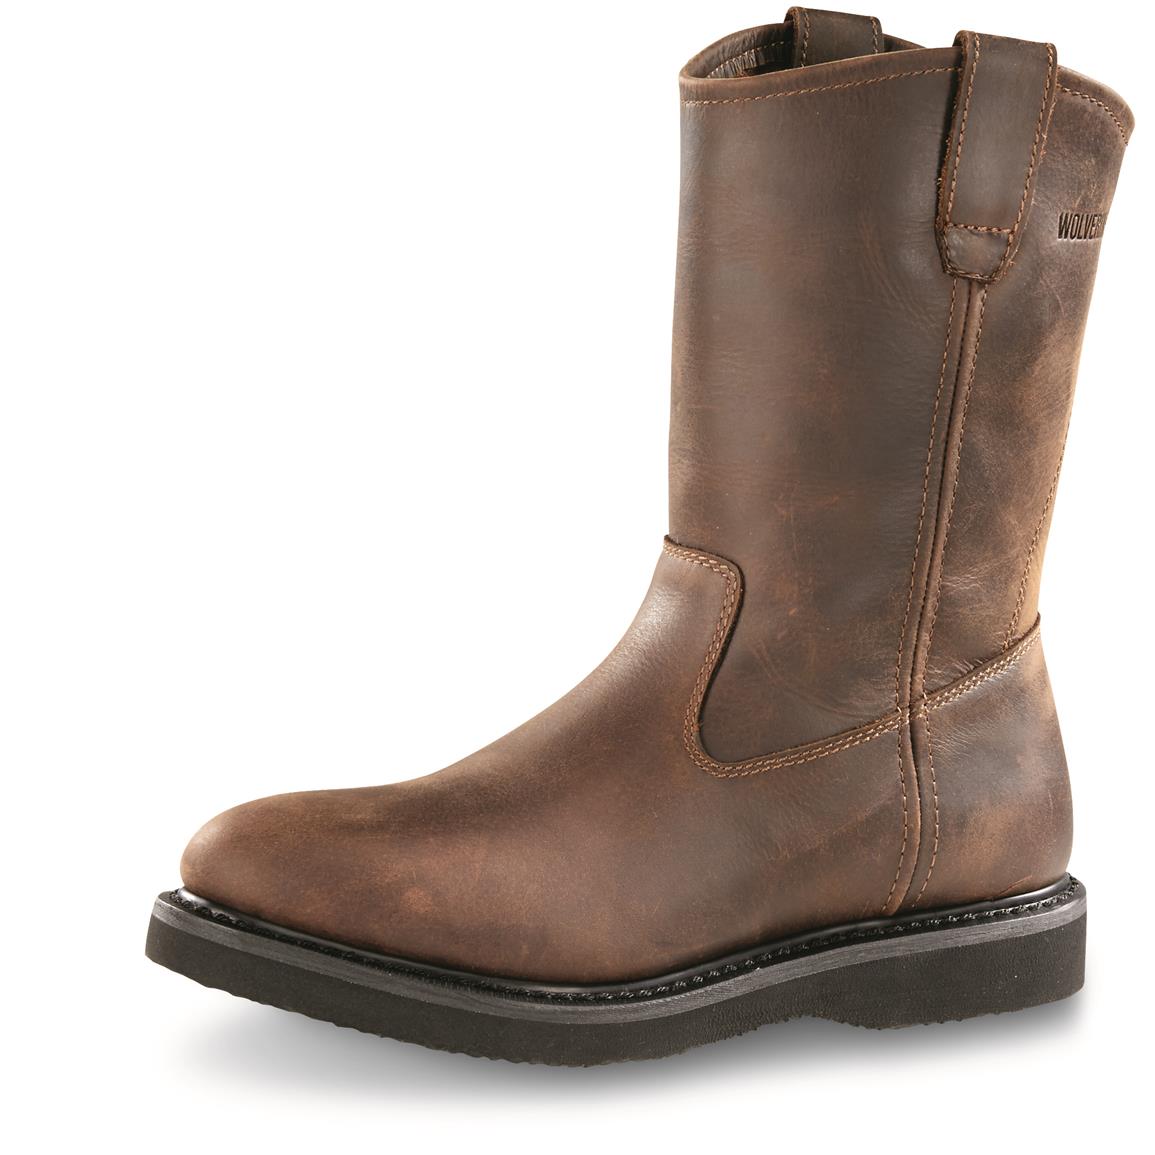 Wolverine Men's Wellington Boots - 87292, Work Boots at Sportsman's Guide